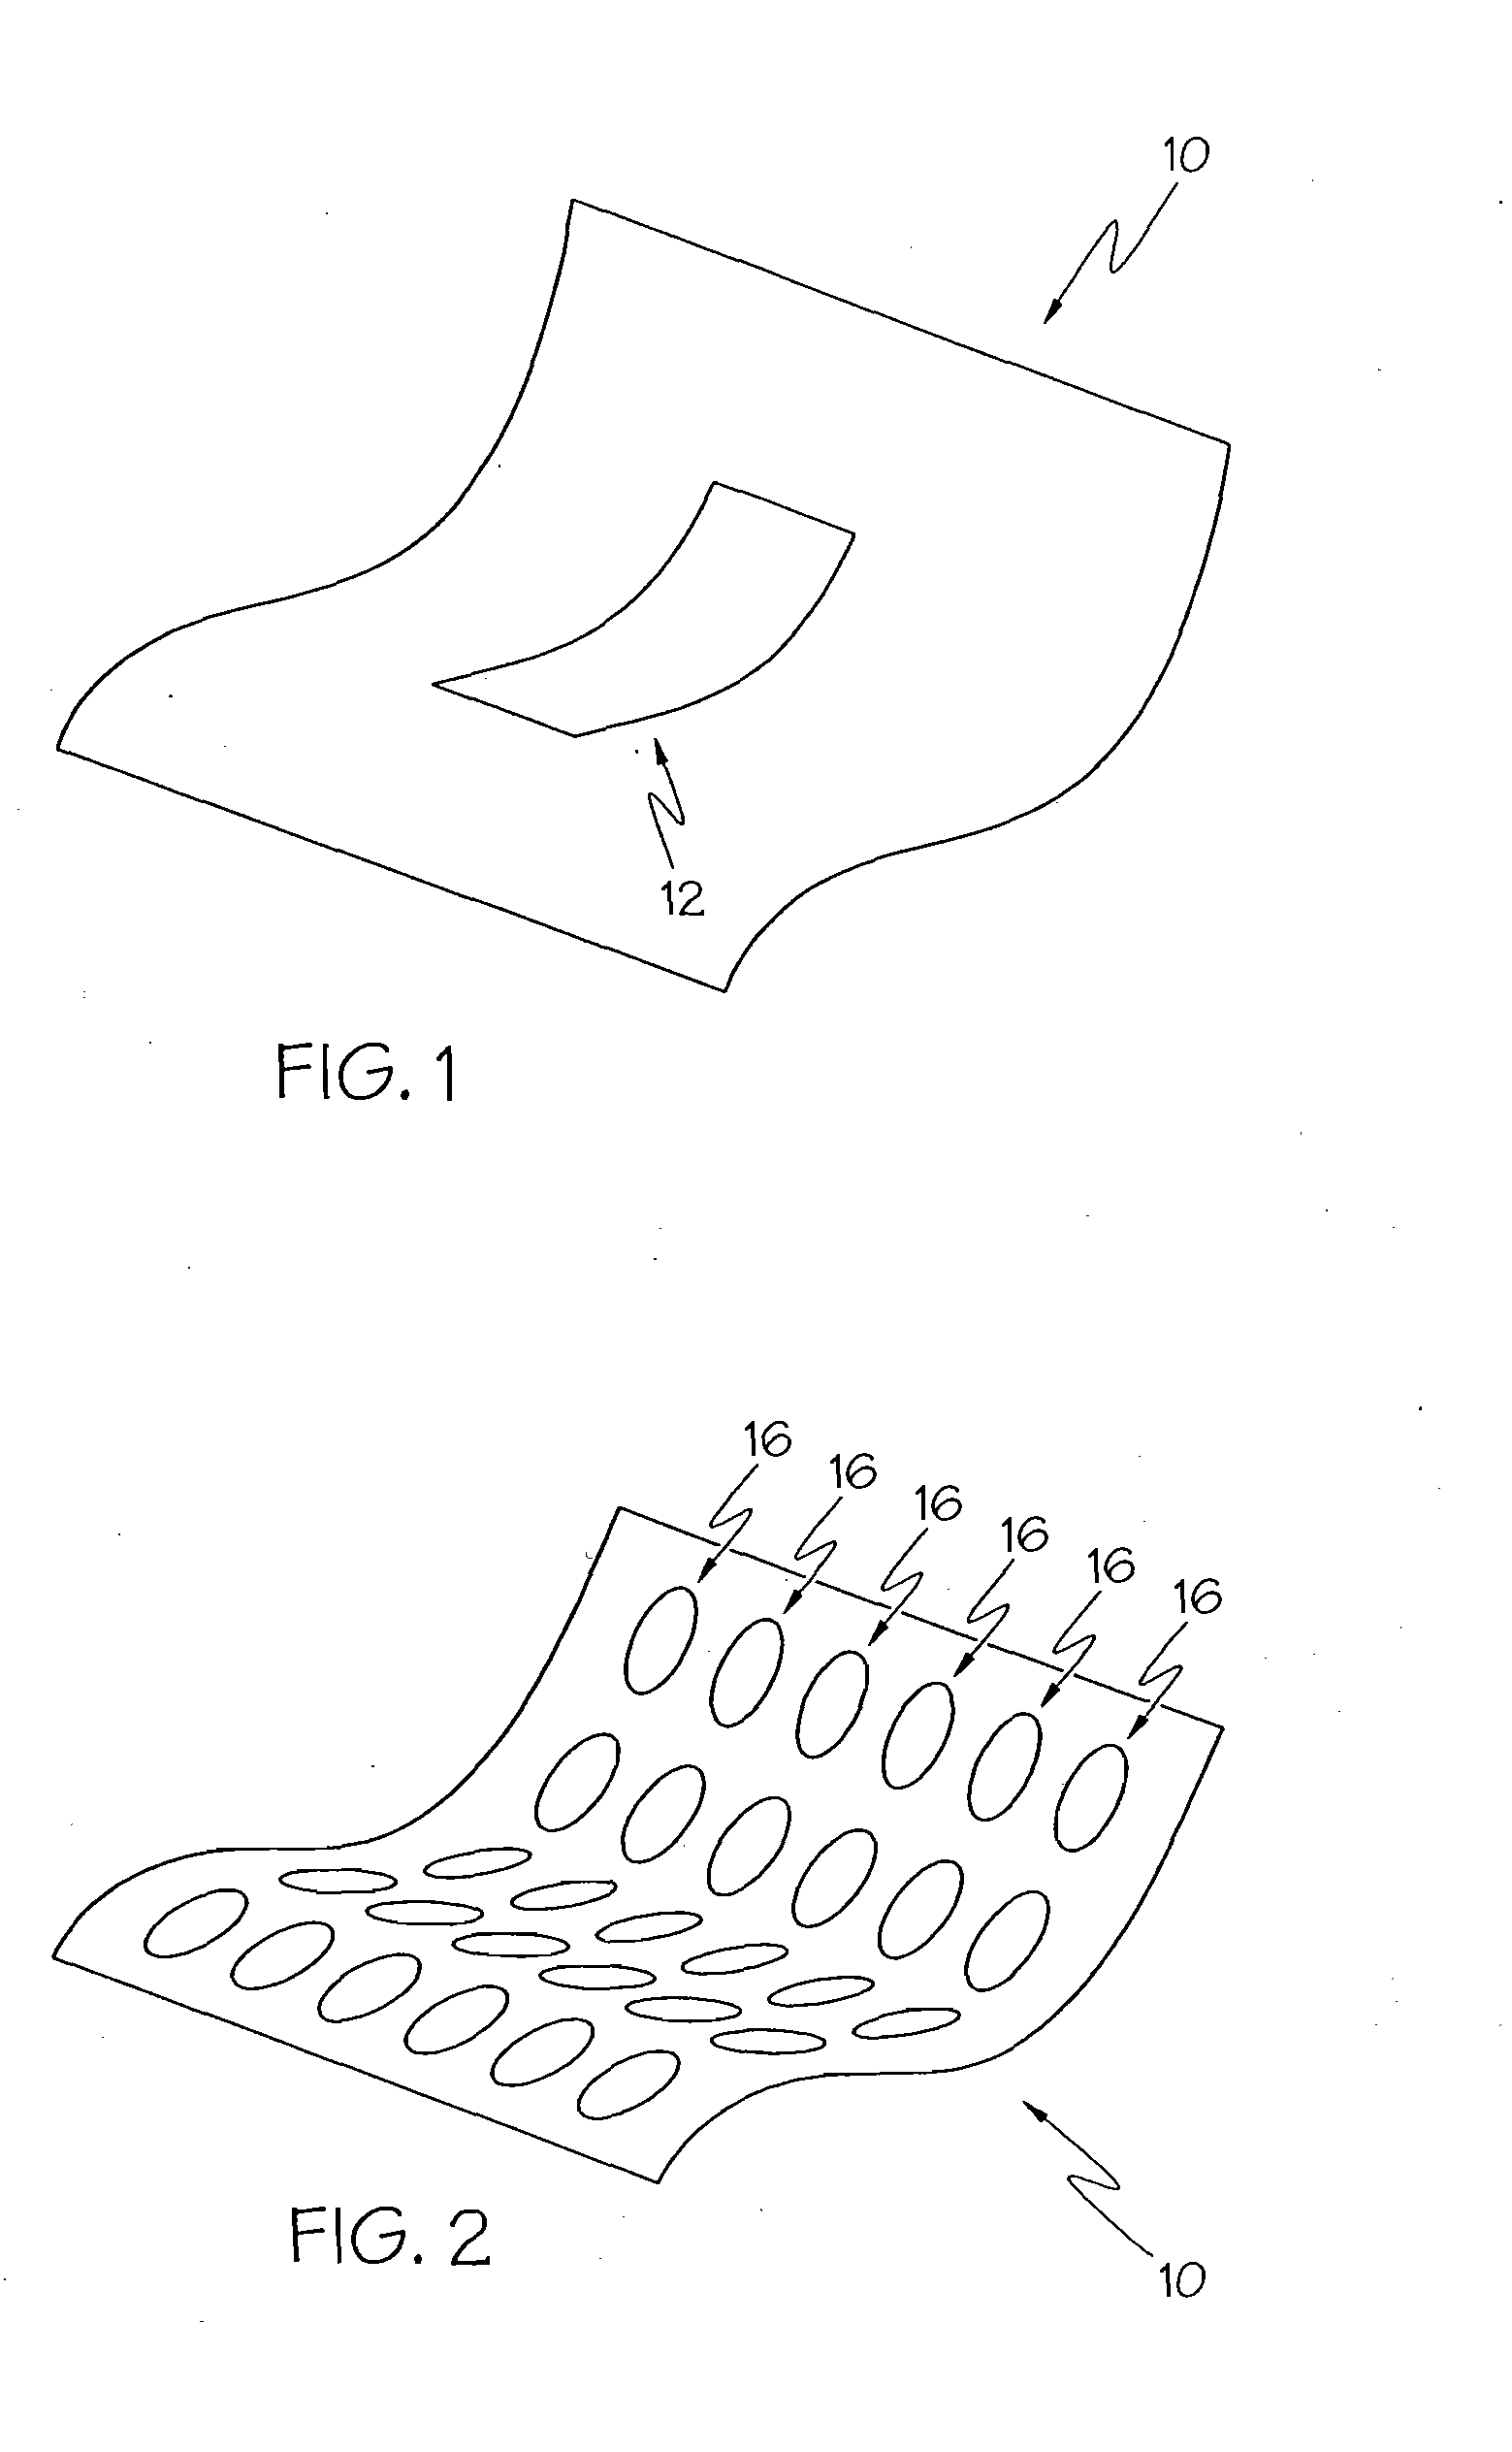 Devices for reduction of post operative ileus